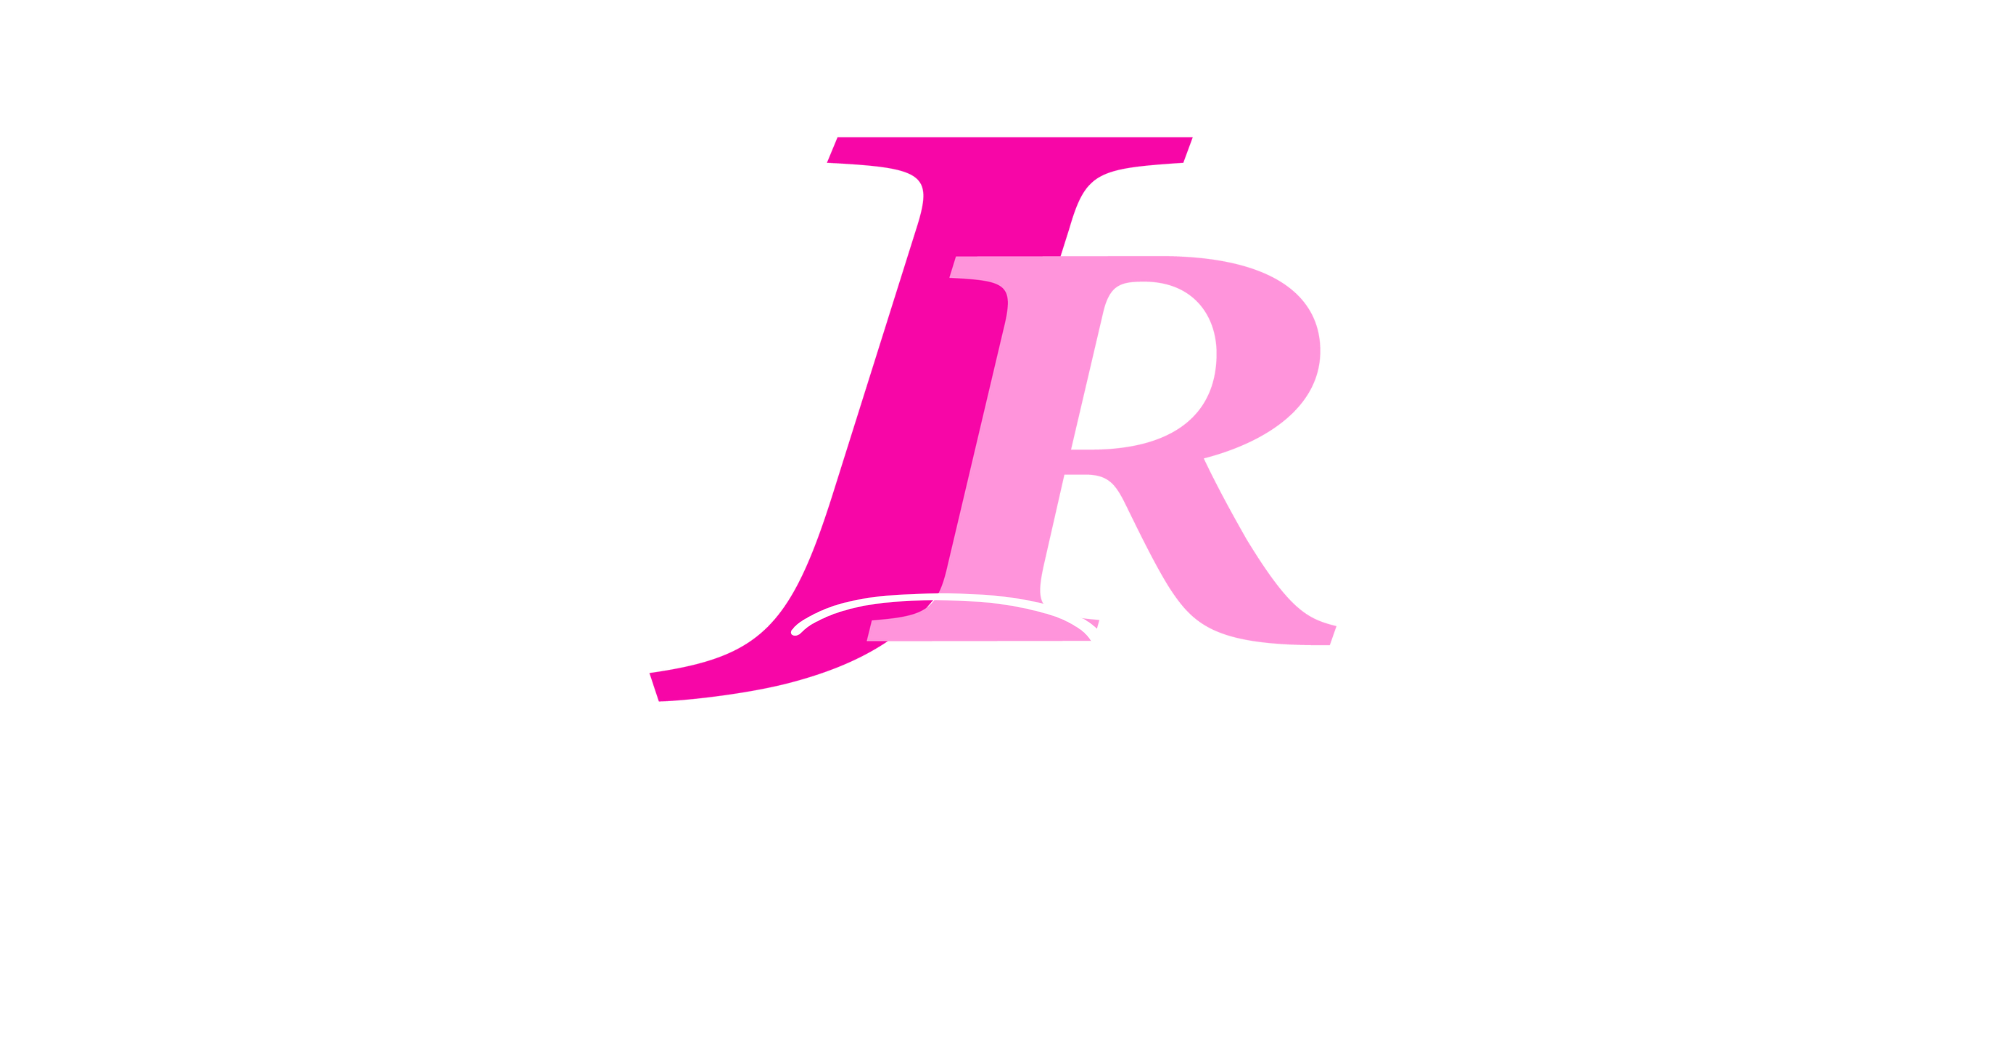 The Jasmine Ray Collection